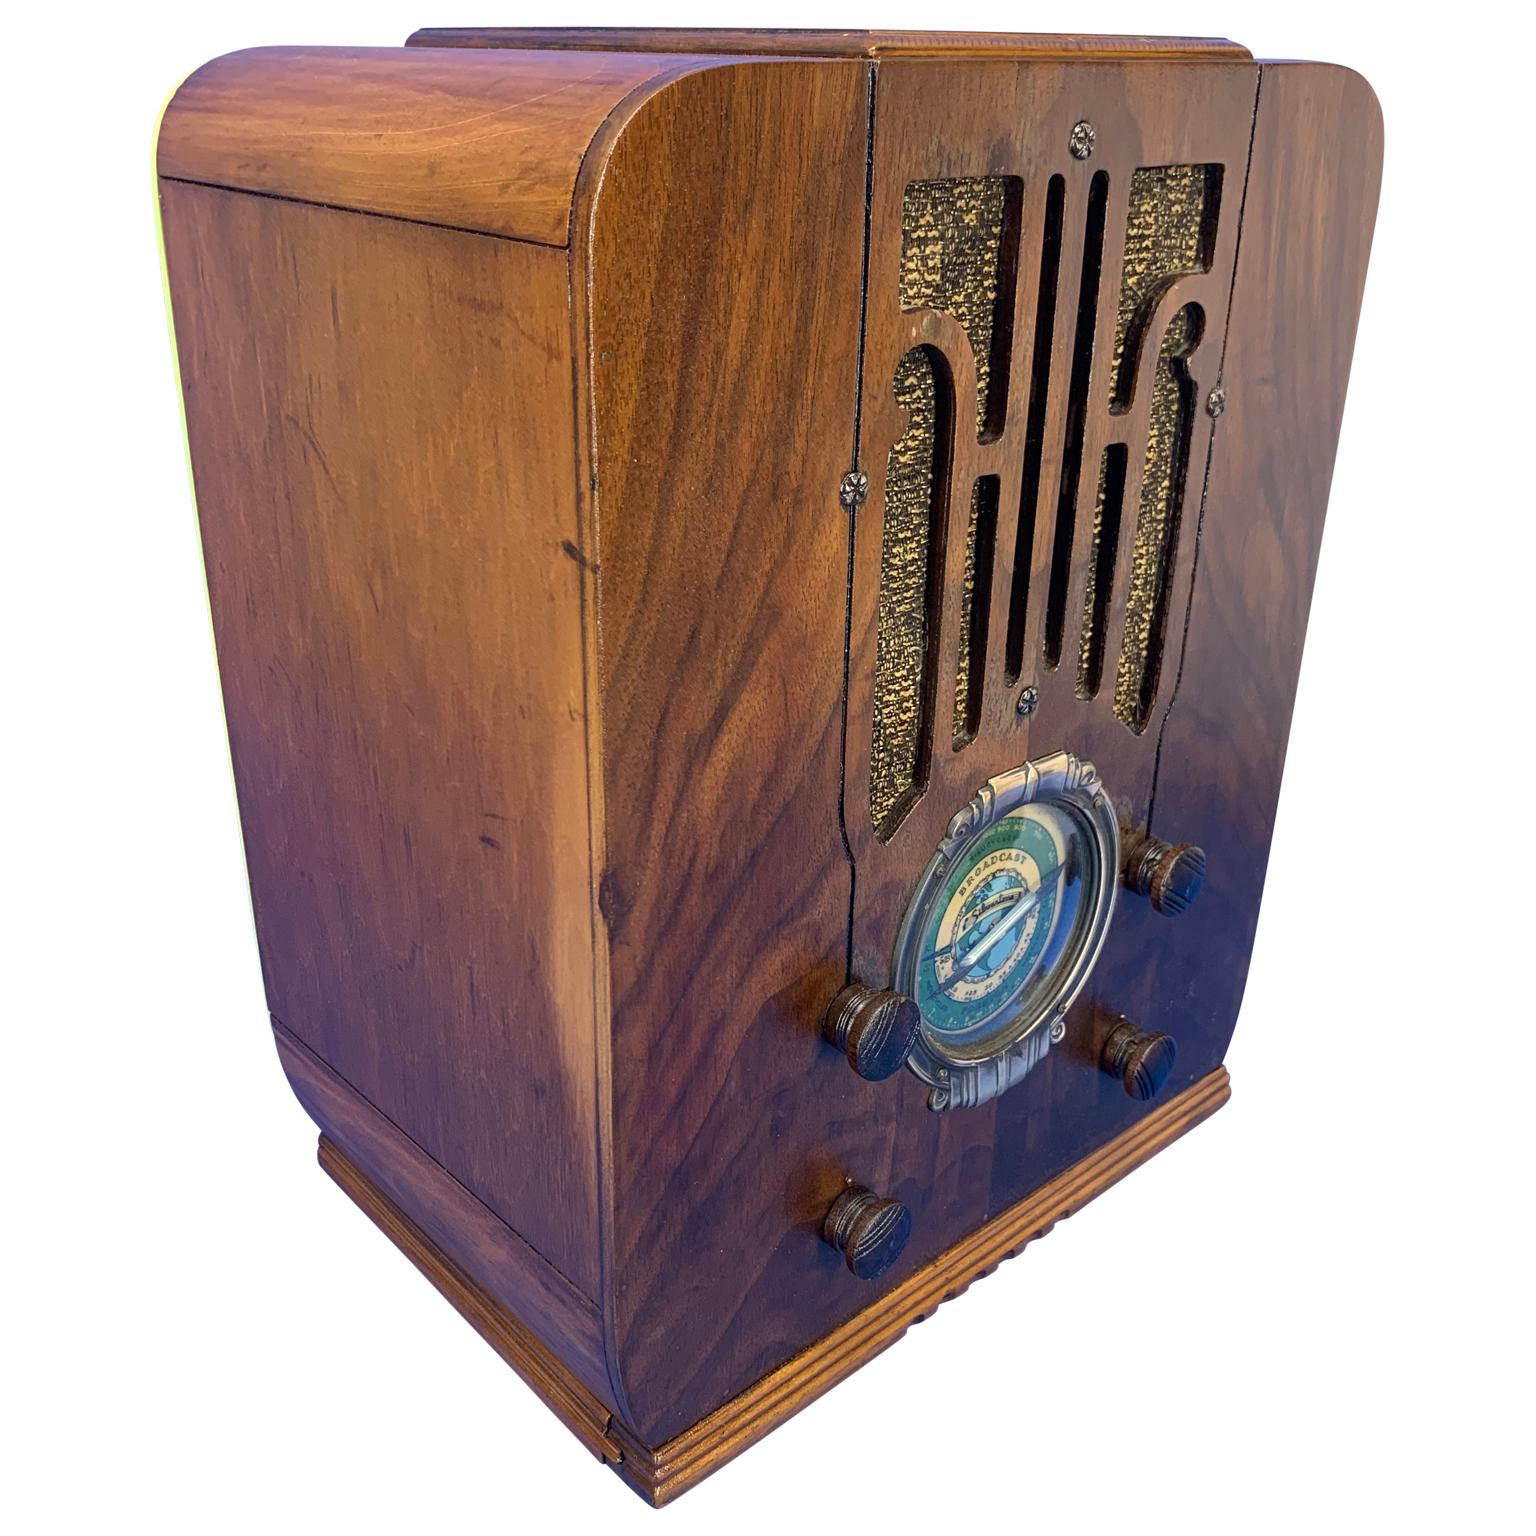 Vintage decorative silvertone tabletop radio with plexiglass back, circa 1910

The radio is newly restored and has a plexiglass back in order to showcase the inside of this early hardware.